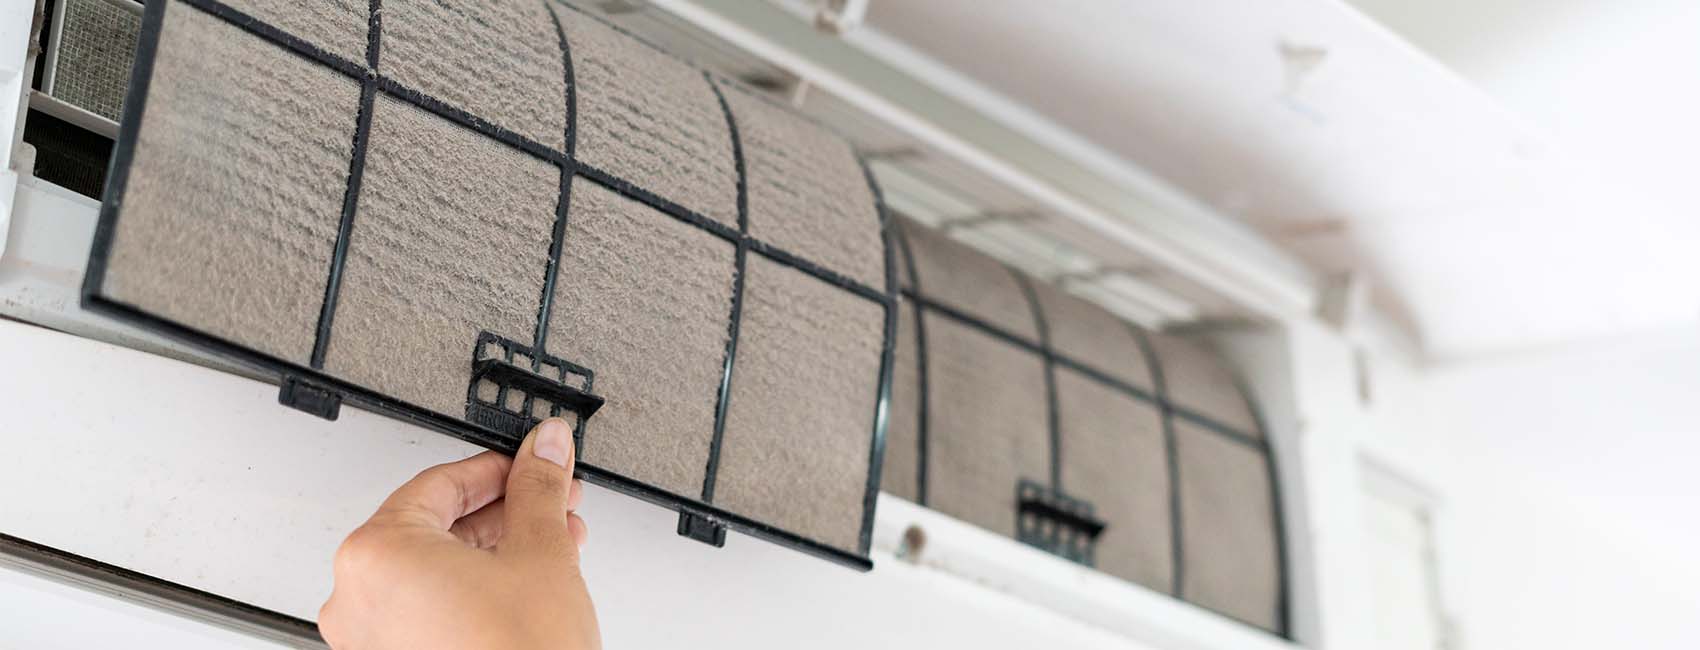 cleaning the air conditioner filter